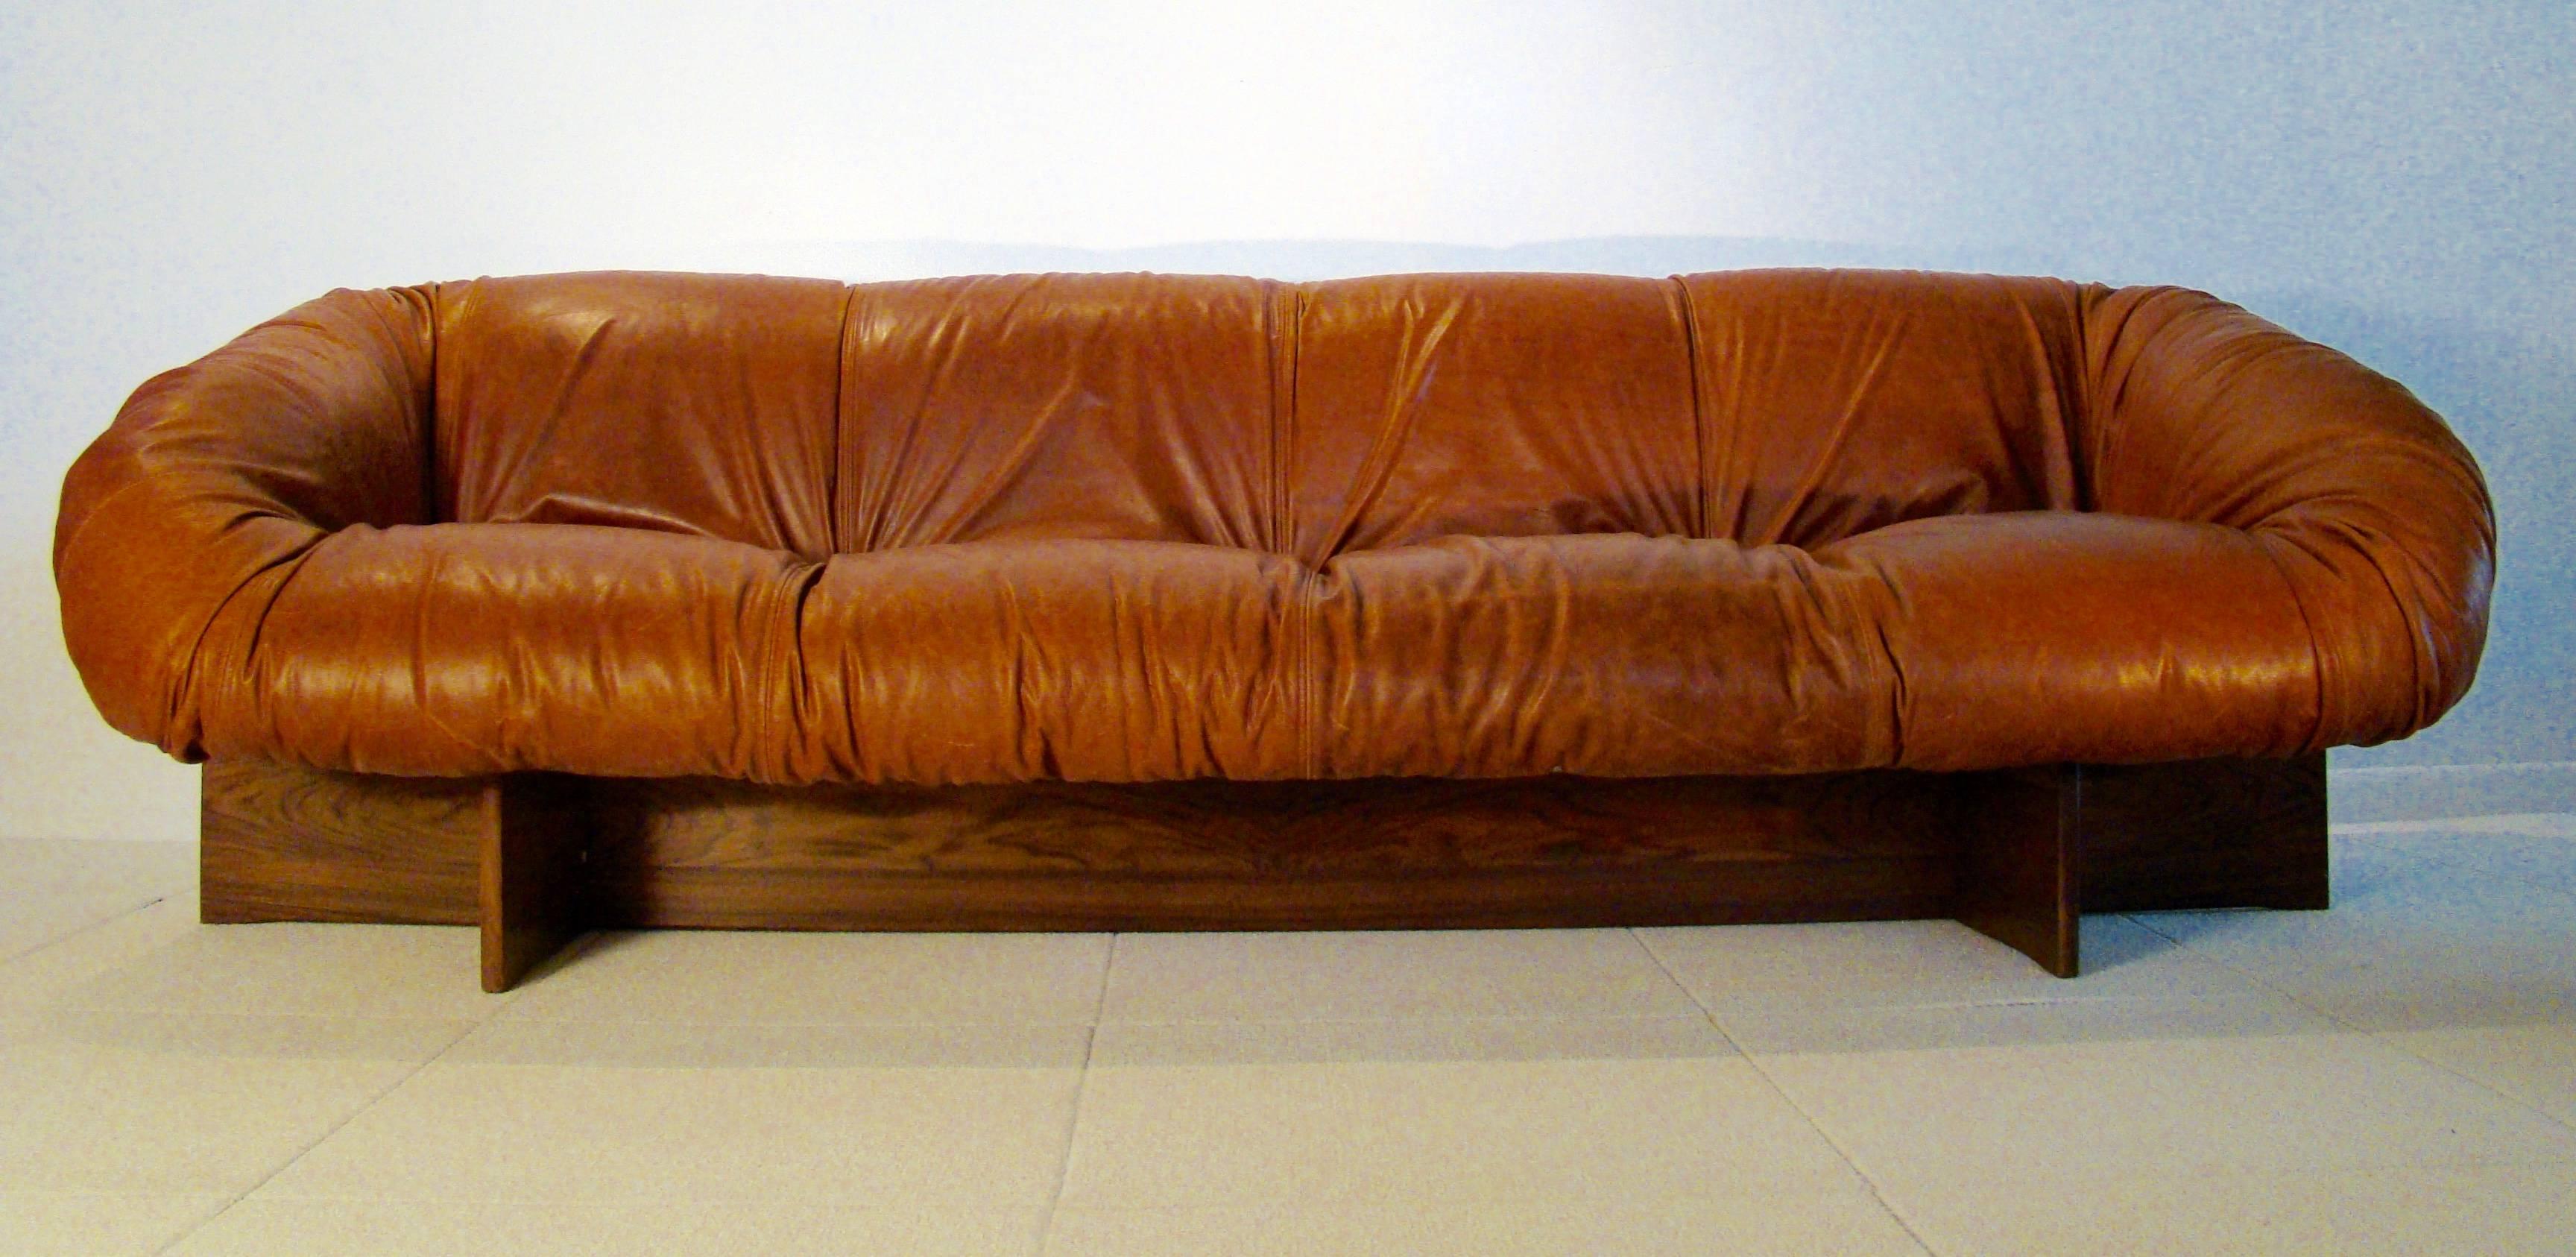 Fine and Rare Percival Lafer Sofa in Leather, Fibreglass and Rosewood “Brazil” 1